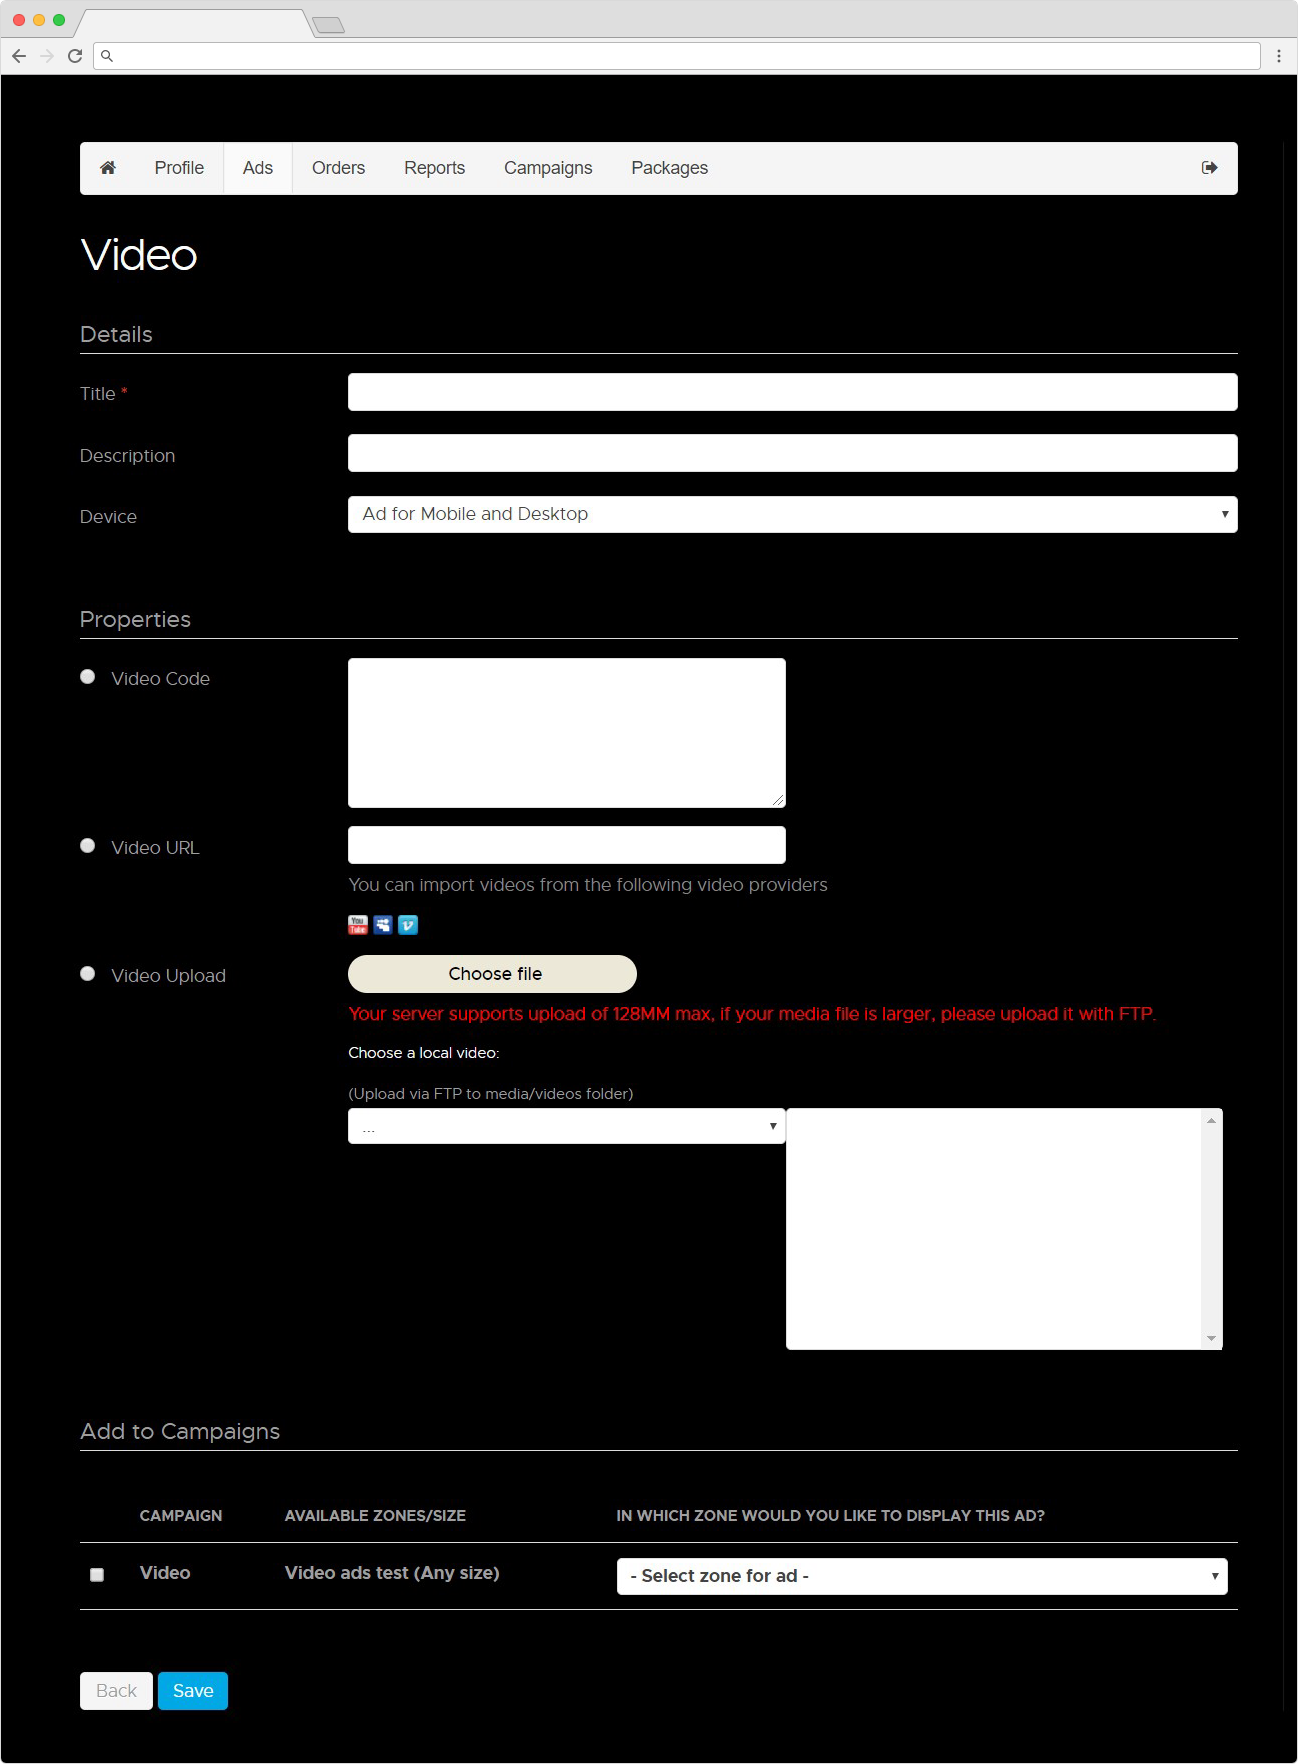 Frontend View to upload Video Ad